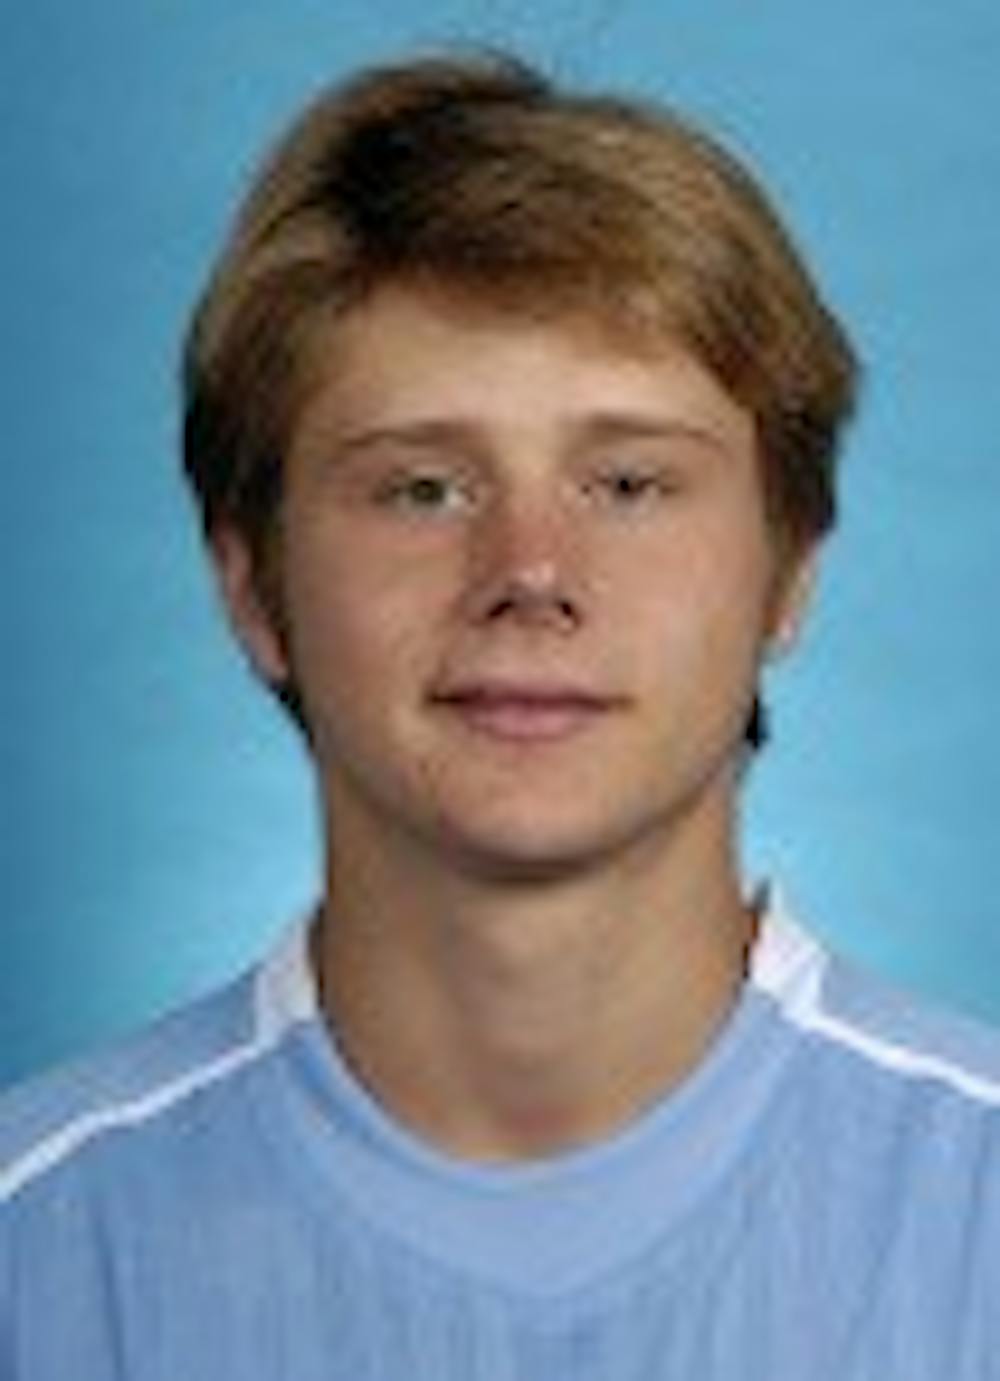 Sophomore midfielder Kirk Urso struck his fourth goal of the season in UNC’s NCAA victory.